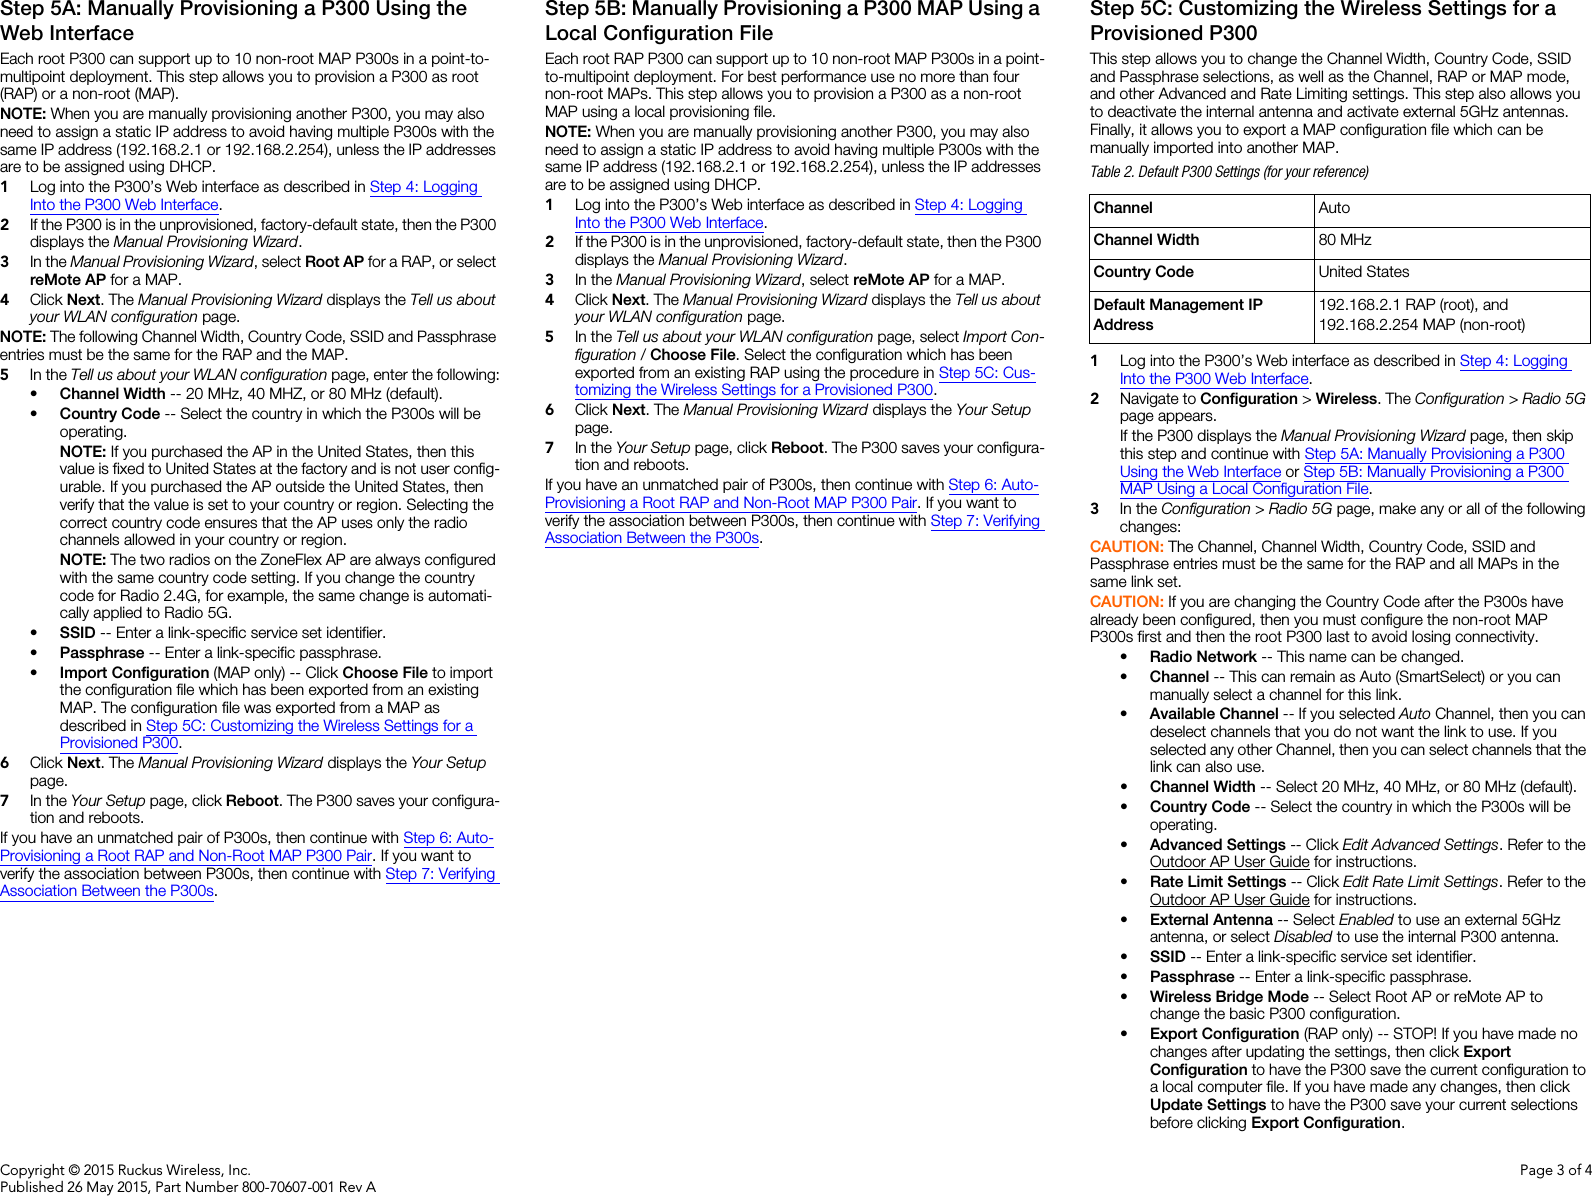 Copyright © 2015 Ruckus Wireless, Inc.Published 26 May 2015, Part Number 800-70607-001 Rev APage 3 of 4Step 5A: Manually Provisioning a P300 Using the Web InterfaceEach root P300 can support up to 10 non-root MAP P300s in a point-to-multipoint deployment. This step allows you to provision a P300 as root (RAP) or a non-root (MAP).NOTE: When you are manually provisioning another P300, you may also need to assign a static IP address to avoid having multiple P300s with the same IP address (192.168.2.1 or 192.168.2.254), unless the IP addresses are to be assigned using DHCP. 1Log into the P300’s Web interface as described in Step 4: Logging Into the P300 Web Interface.2If the P300 is in the unprovisioned, factory-default state, then the P300 displays the Manual Provisioning Wizard. 3In the Manual Provisioning Wizard, select Root AP for a RAP, or select reMote AP for a MAP. 4Click Next. The Manual Provisioning Wizard displays the Tell us about your WLAN configuration page.NOTE: The following Channel Width, Country Code, SSID and Passphrase entries must be the same for the RAP and the MAP.5In the Tell us about your WLAN configuration page, enter the following:•Channel Width -- 20 MHz, 40 MHZ, or 80 MHz (default).•Country Code -- Select the country in which the P300s will be operating.NOTE: If you purchased the AP in the United States, then this value is fixed to United States at the factory and is not user config-urable. If you purchased the AP outside the United States, then verify that the value is set to your country or region. Selecting the correct country code ensures that the AP uses only the radio channels allowed in your country or region.NOTE: The two radios on the ZoneFlex AP are always configured with the same country code setting. If you change the country code for Radio 2.4G, for example, the same change is automati-cally applied to Radio 5G.•SSID -- Enter a link-specific service set identifier.•Passphrase -- Enter a link-specific passphrase.•Import Configuration (MAP only) -- Click Choose File to import the configuration file which has been exported from an existing MAP. The configuration file was exported from a MAP as described in Step 5C: Customizing the Wireless Settings for a Provisioned P300.6Click Next. The Manual Provisioning Wizard displays the Your Setup page.7In the Your Setup page, click Reboot. The P300 saves your configura-tion and reboots.If you have an unmatched pair of P300s, then continue with Step 6: Auto-Provisioning a Root RAP and Non-Root MAP P300 Pair. If you want to verify the association between P300s, then continue with Step 7: Verifying Association Between the P300s. Step 5B: Manually Provisioning a P300 MAP Using a Local Configuration FileEach root RAP P300 can support up to 10 non-root MAP P300s in a point-to-multipoint deployment. For best performance use no more than four non-root MAPs. This step allows you to provision a P300 as a non-root MAP using a local provisioning file.NOTE: When you are manually provisioning another P300, you may also need to assign a static IP address to avoid having multiple P300s with the same IP address (192.168.2.1 or 192.168.2.254), unless the IP addresses are to be assigned using DHCP. 1Log into the P300’s Web interface as described in Step 4: Logging Into the P300 Web Interface.2If the P300 is in the unprovisioned, factory-default state, then the P300 displays the Manual Provisioning Wizard. 3In the Manual Provisioning Wizard, select reMote AP for a MAP. 4Click Next. The Manual Provisioning Wizard displays the Tell us about your WLAN configuration page.5In the Tell us about your WLAN configuration page, select Import Con-figuration / Choose File. Select the configuration which has been exported from an existing RAP using the procedure in Step 5C: Cus-tomizing the Wireless Settings for a Provisioned P300.6Click Next. The Manual Provisioning Wizard displays the Your Setup page.7In the Your Setup page, click Reboot. The P300 saves your configura-tion and reboots.If you have an unmatched pair of P300s, then continue with Step 6: Auto-Provisioning a Root RAP and Non-Root MAP P300 Pair. If you want to verify the association between P300s, then continue with Step 7: Verifying Association Between the P300s. Step 5C: Customizing the Wireless Settings for a Provisioned P300This step allows you to change the Channel Width, Country Code, SSID and Passphrase selections, as well as the Channel, RAP or MAP mode, and other Advanced and Rate Limiting settings. This step also allows you to deactivate the internal antenna and activate external 5GHz antennas. Finally, it allows you to export a MAP configuration file which can be manually imported into another MAP.1Log into the P300’s Web interface as described in Step 4: Logging Into the P300 Web Interface.2Navigate to Configuration &gt; Wireless. The Configuration &gt; Radio 5G page appears. If the P300 displays the Manual Provisioning Wizard page, then skip this step and continue with Step 5A: Manually Provisioning a P300 Using the Web Interface or Step 5B: Manually Provisioning a P300 MAP Using a Local Configuration File.3In the Configuration &gt; Radio 5G page, make any or all of the following changes:CAUTION: The Channel, Channel Width, Country Code, SSID and Passphrase entries must be the same for the RAP and all MAPs in the same link set.CAUTION: If you are changing the Country Code after the P300s have already been configured, then you must configure the non-root MAP P300s first and then the root P300 last to avoid losing connectivity. •Radio Network -- This name can be changed.•Channel -- This can remain as Auto (SmartSelect) or you can manually select a channel for this link.•Available Channel -- If you selected Auto Channel, then you can deselect channels that you do not want the link to use. If you selected any other Channel, then you can select channels that the link can also use. •Channel Width -- Select 20 MHz, 40 MHz, or 80 MHz (default).•Country Code -- Select the country in which the P300s will be operating.•Advanced Settings -- Click Edit Advanced Settings. Refer to the Outdoor AP User Guide for instructions.•Rate Limit Settings -- Click Edit Rate Limit Settings. Refer to the Outdoor AP User Guide for instructions.•External Antenna -- Select Enabled to use an external 5GHz antenna, or select Disabled to use the internal P300 antenna.•SSID -- Enter a link-specific service set identifier. •Passphrase -- Enter a link-specific passphrase. •Wireless Bridge Mode -- Select Root AP or reMote AP to change the basic P300 configuration.•Export Configuration (RAP only) -- STOP! If you have made no changes after updating the settings, then click Export Configuration to have the P300 save the current configuration to a local computer file. If you have made any changes, then click Update Settings to have the P300 save your current selections before clicking Export Configuration.Table 2. Default P300 Settings (for your reference)Channel AutoChannel Width 80 MHzCountry Code United StatesDefault Management IP Address192.168.2.1 RAP (root), and192.168.2.254 MAP (non-root)